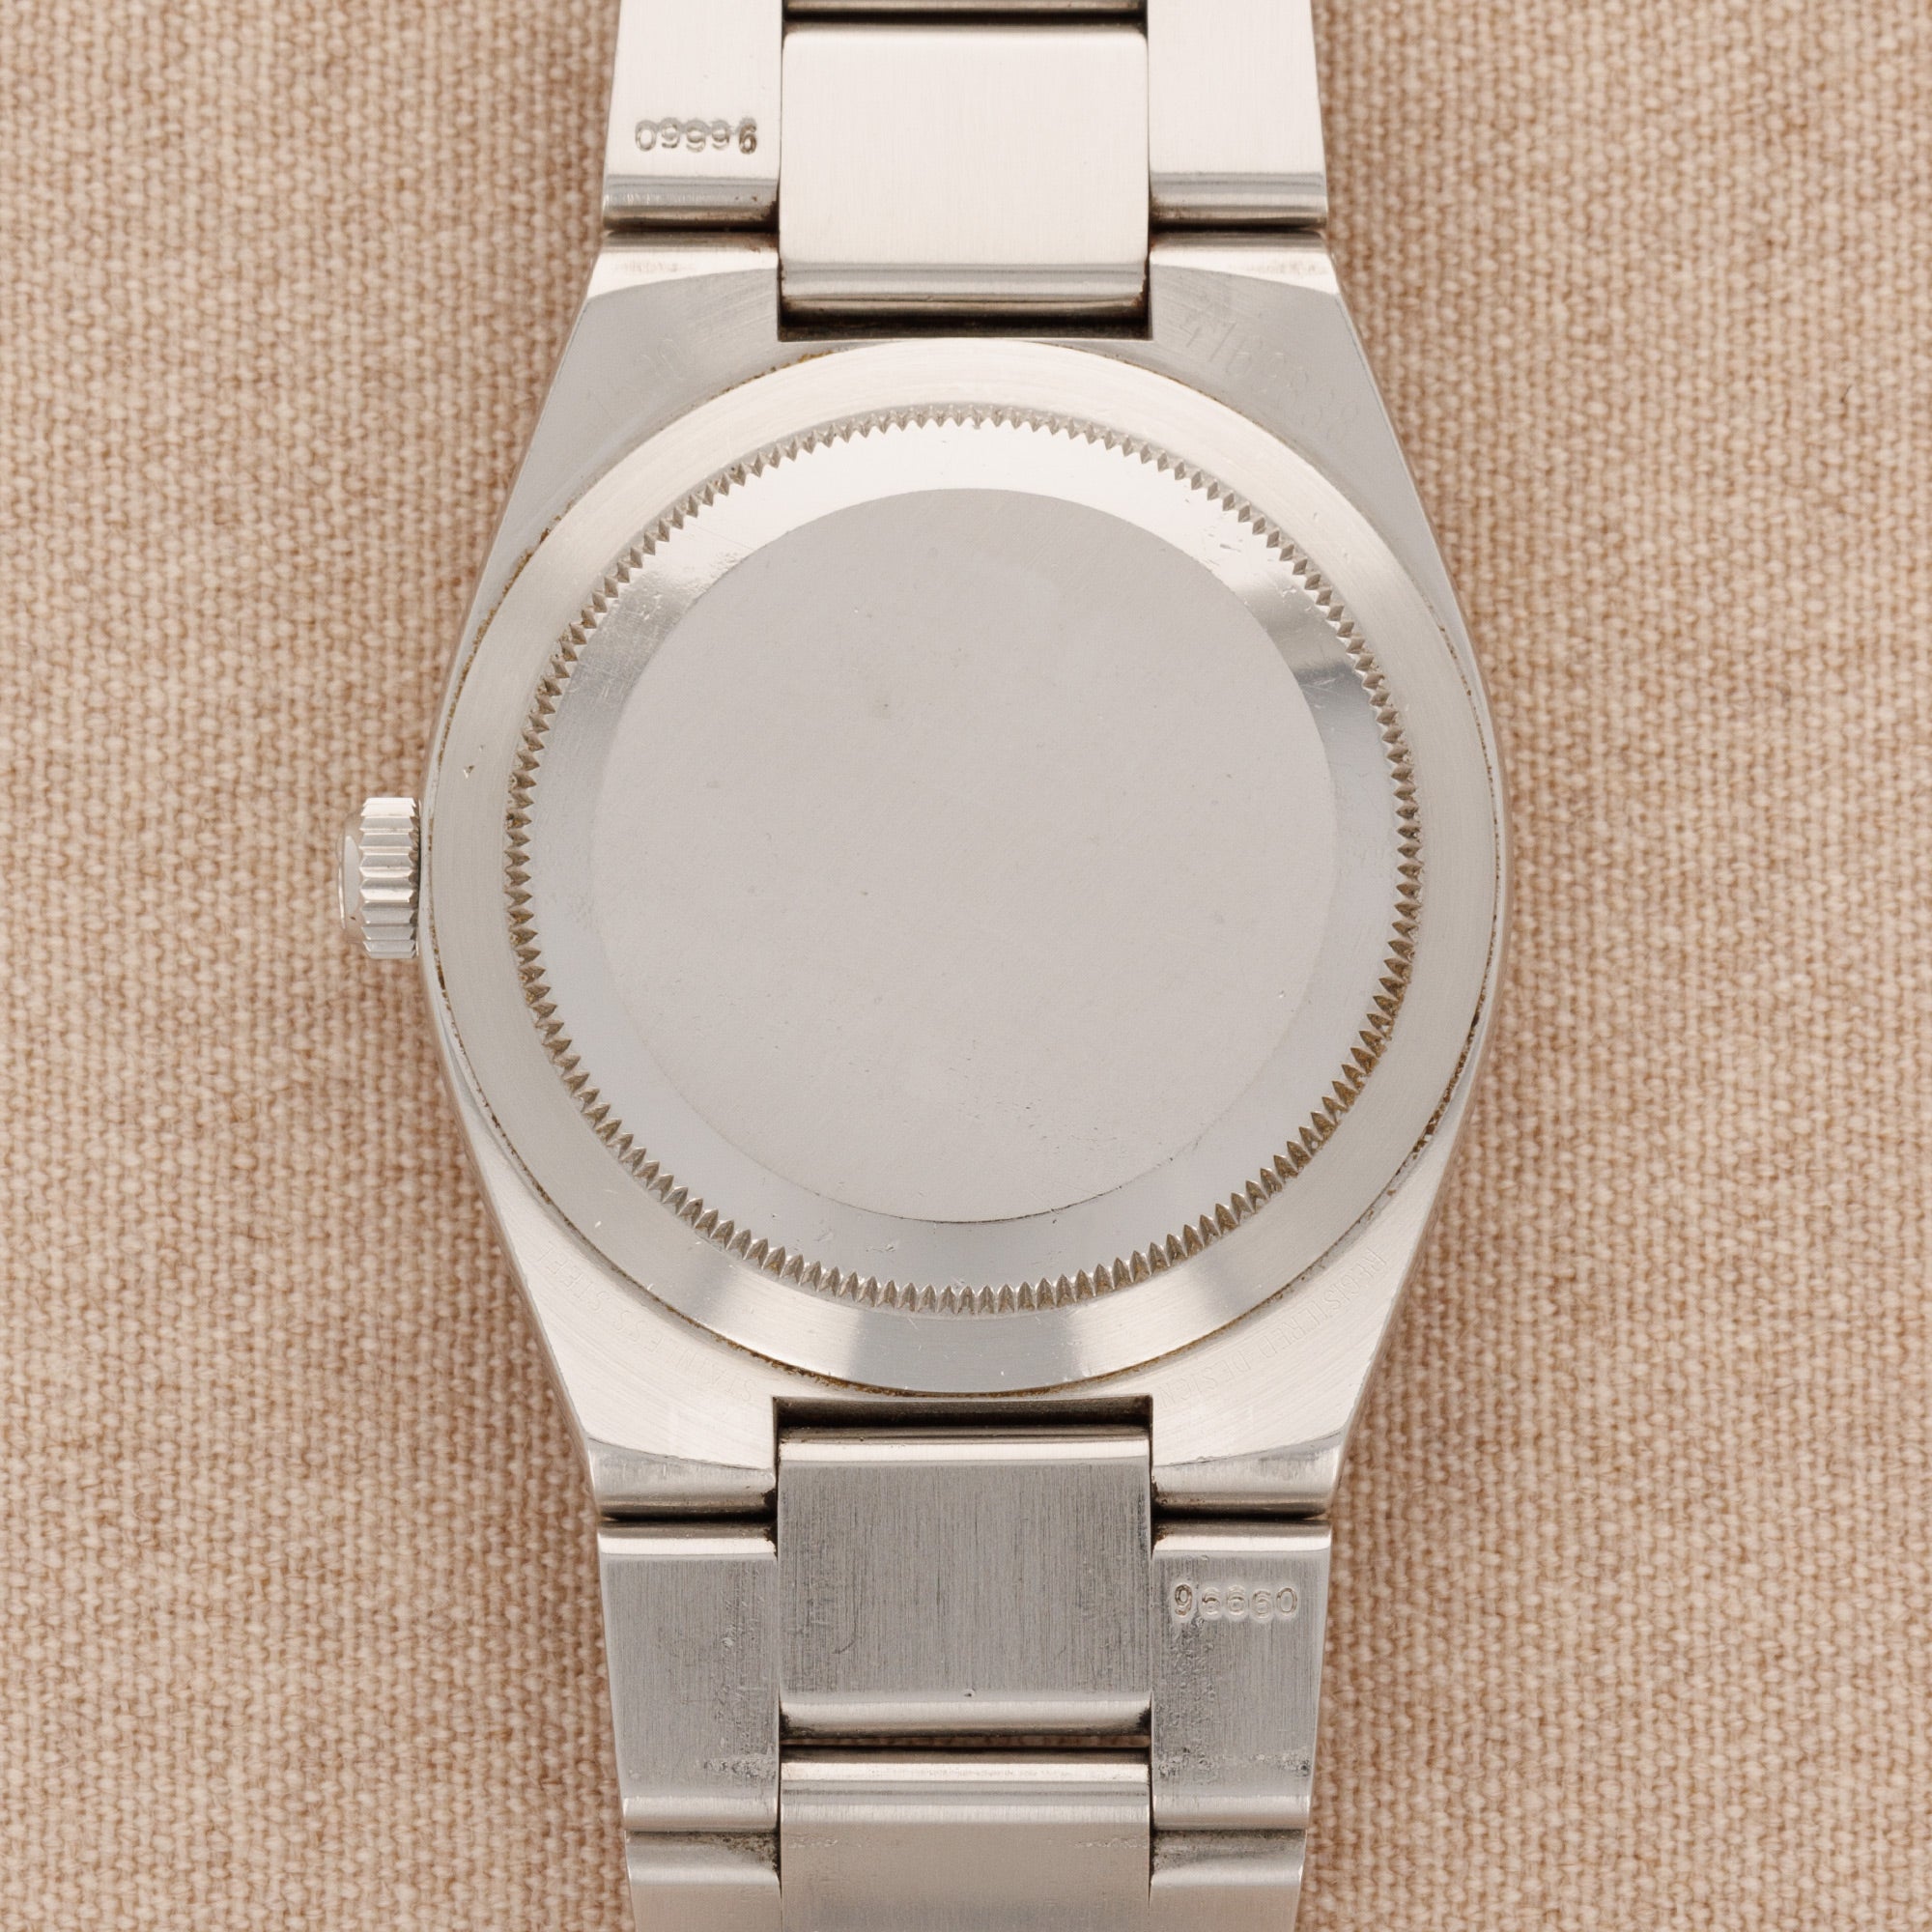 Rolex - Rolex Steel Oyster Perpetual Date ref 1530 - The Keystone Watches